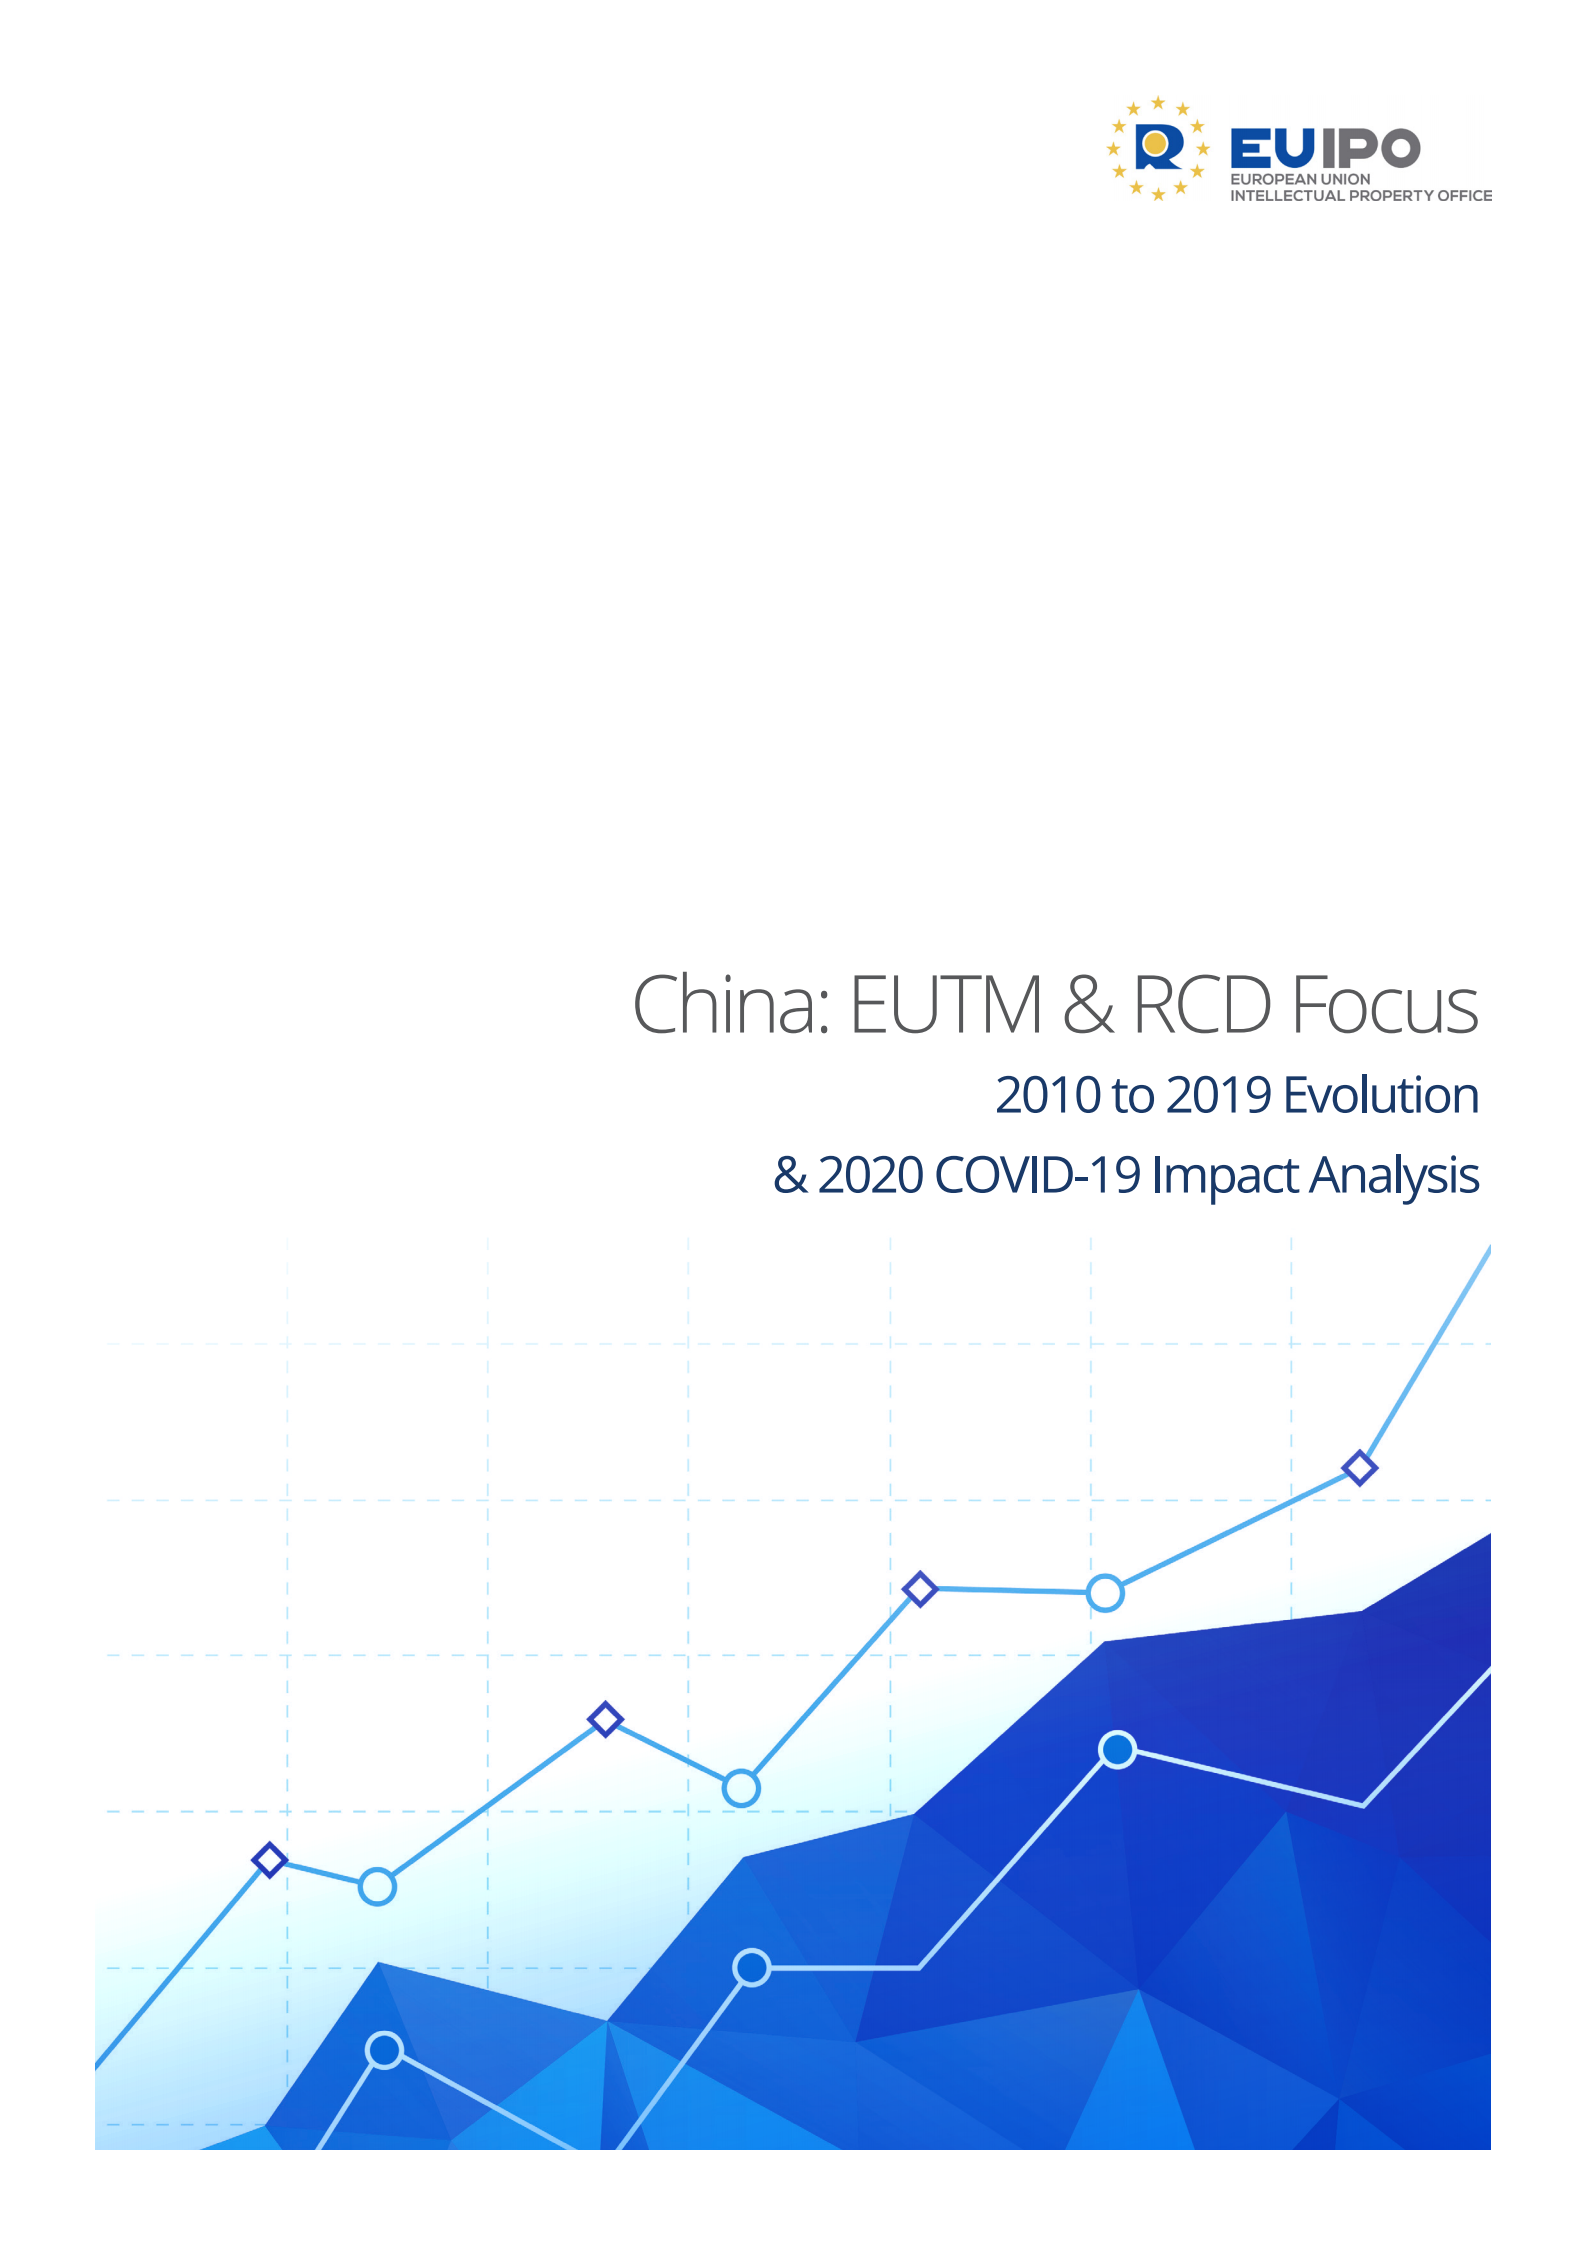 China-EUTM-RCD_2010-2019_Evolution-2020_COVID-19_Impact_Analysis_00.png